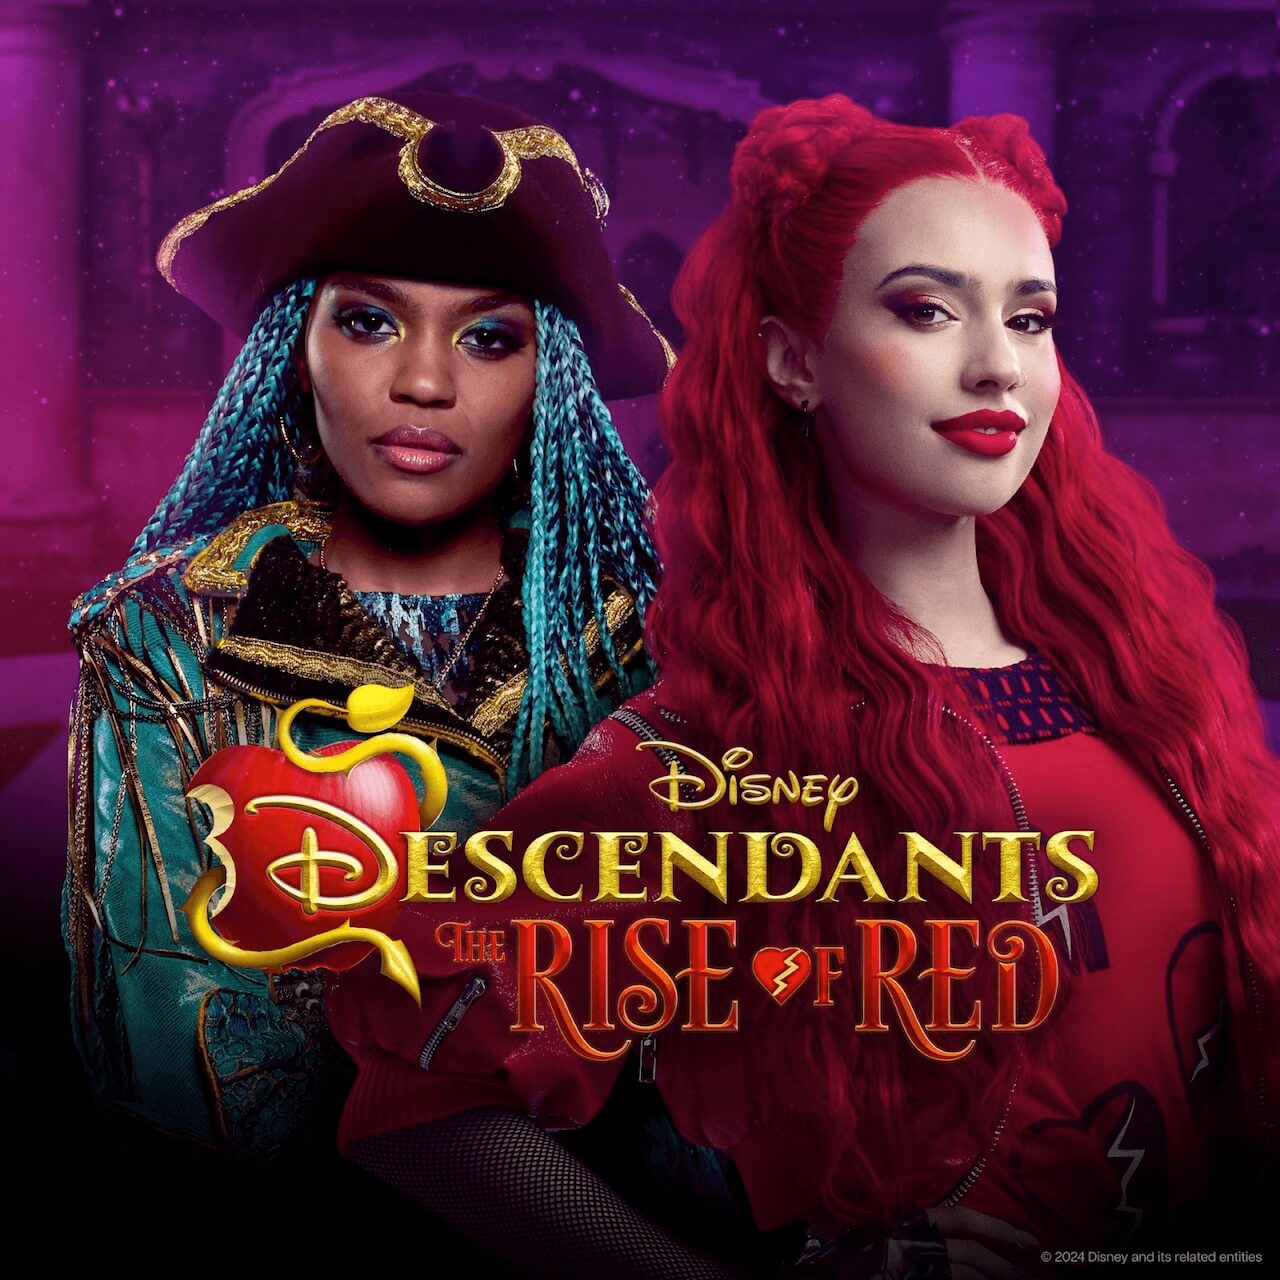 China Anne Mcclain & Kylie Cantrall:  Descendants: The Rise of Red's What's My Name (Red Version)